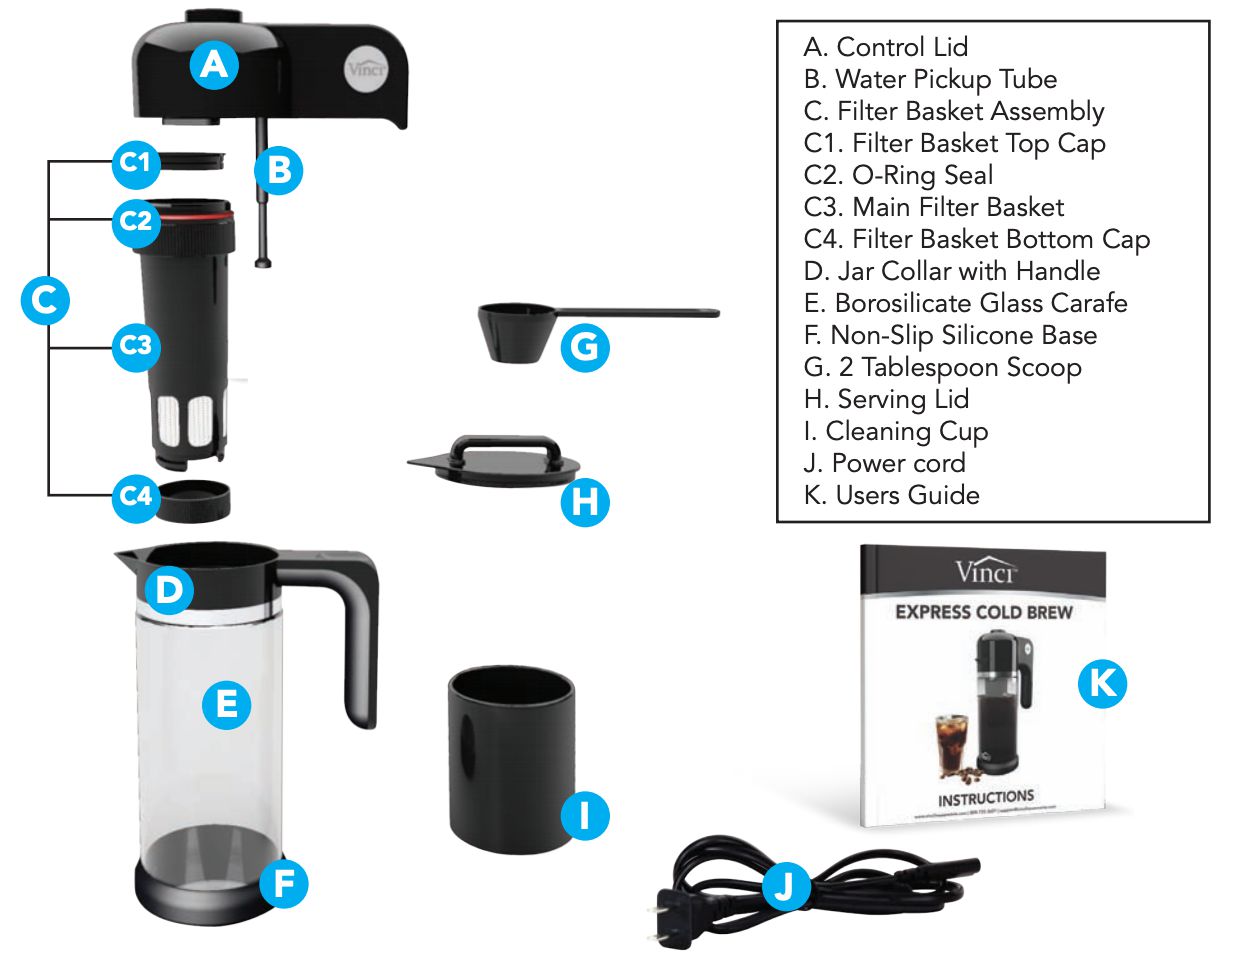 Vinci Express Cold Brew - How To Unbox, Assemble, Use, Clean & Troubleshoot  